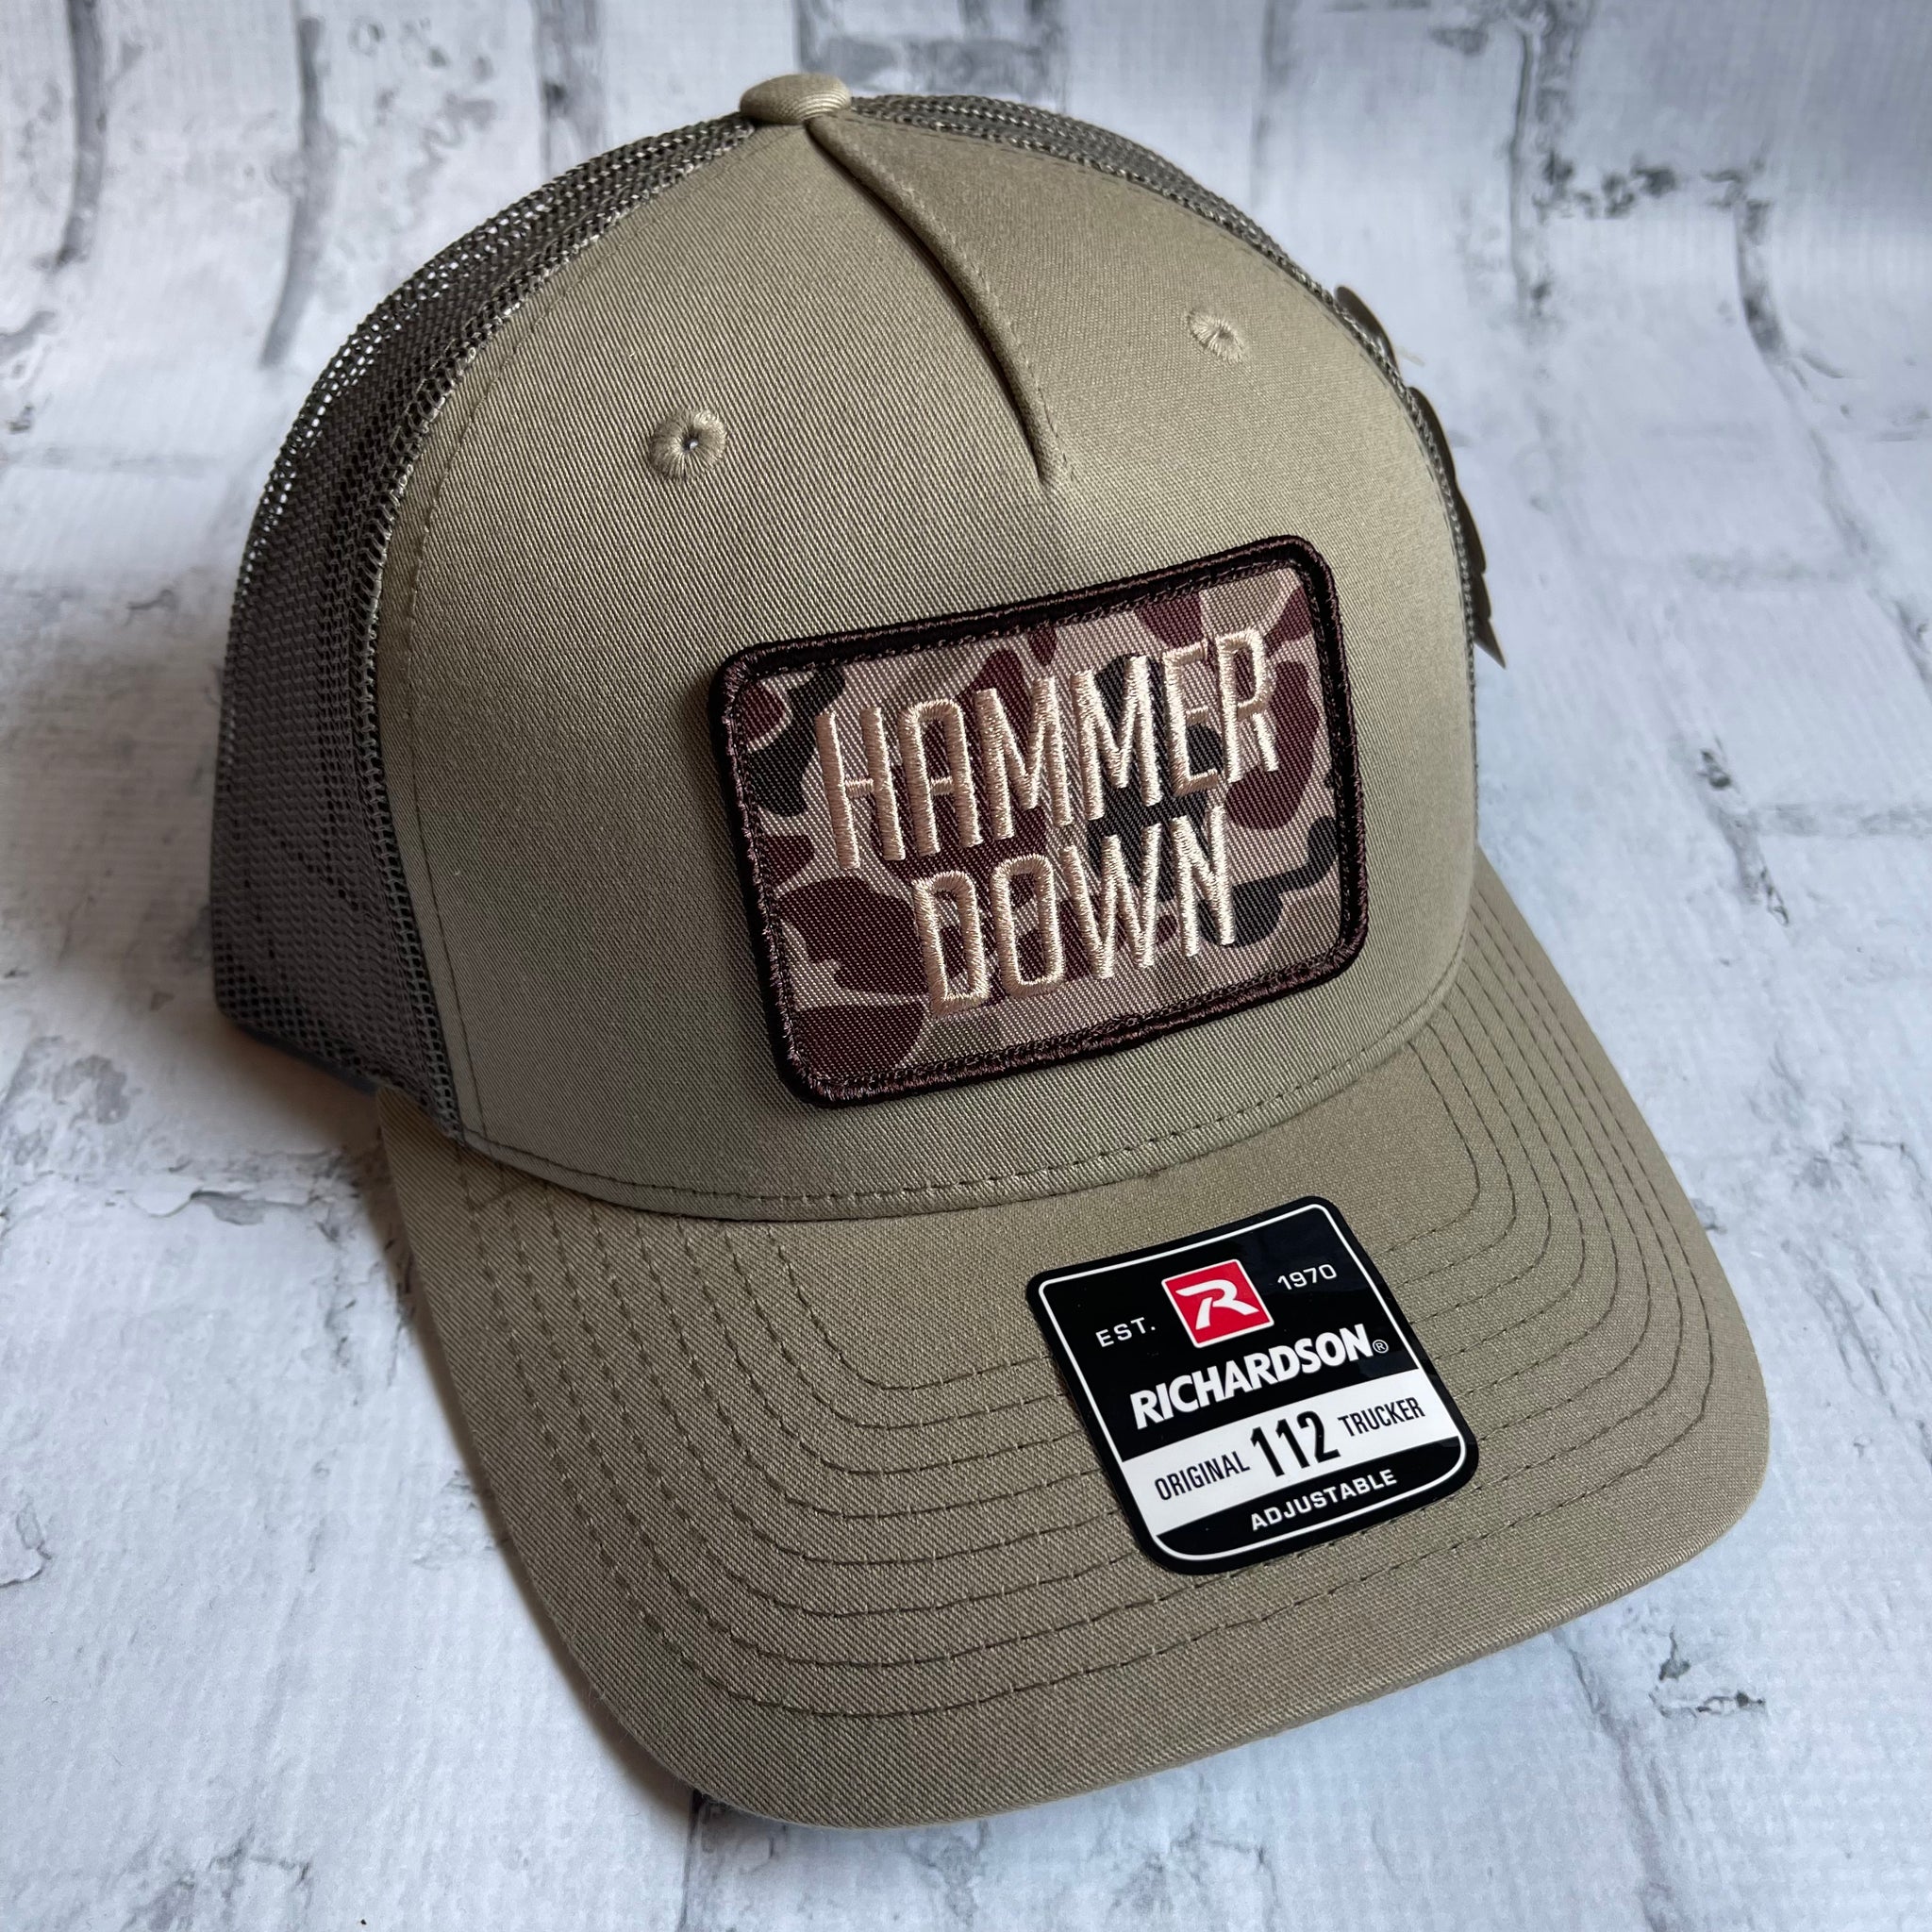 Hammer Down "Simple Brown Duck Camo" Hat - Khaki with Woven Patch - Southern Charm "Shop The Charm"